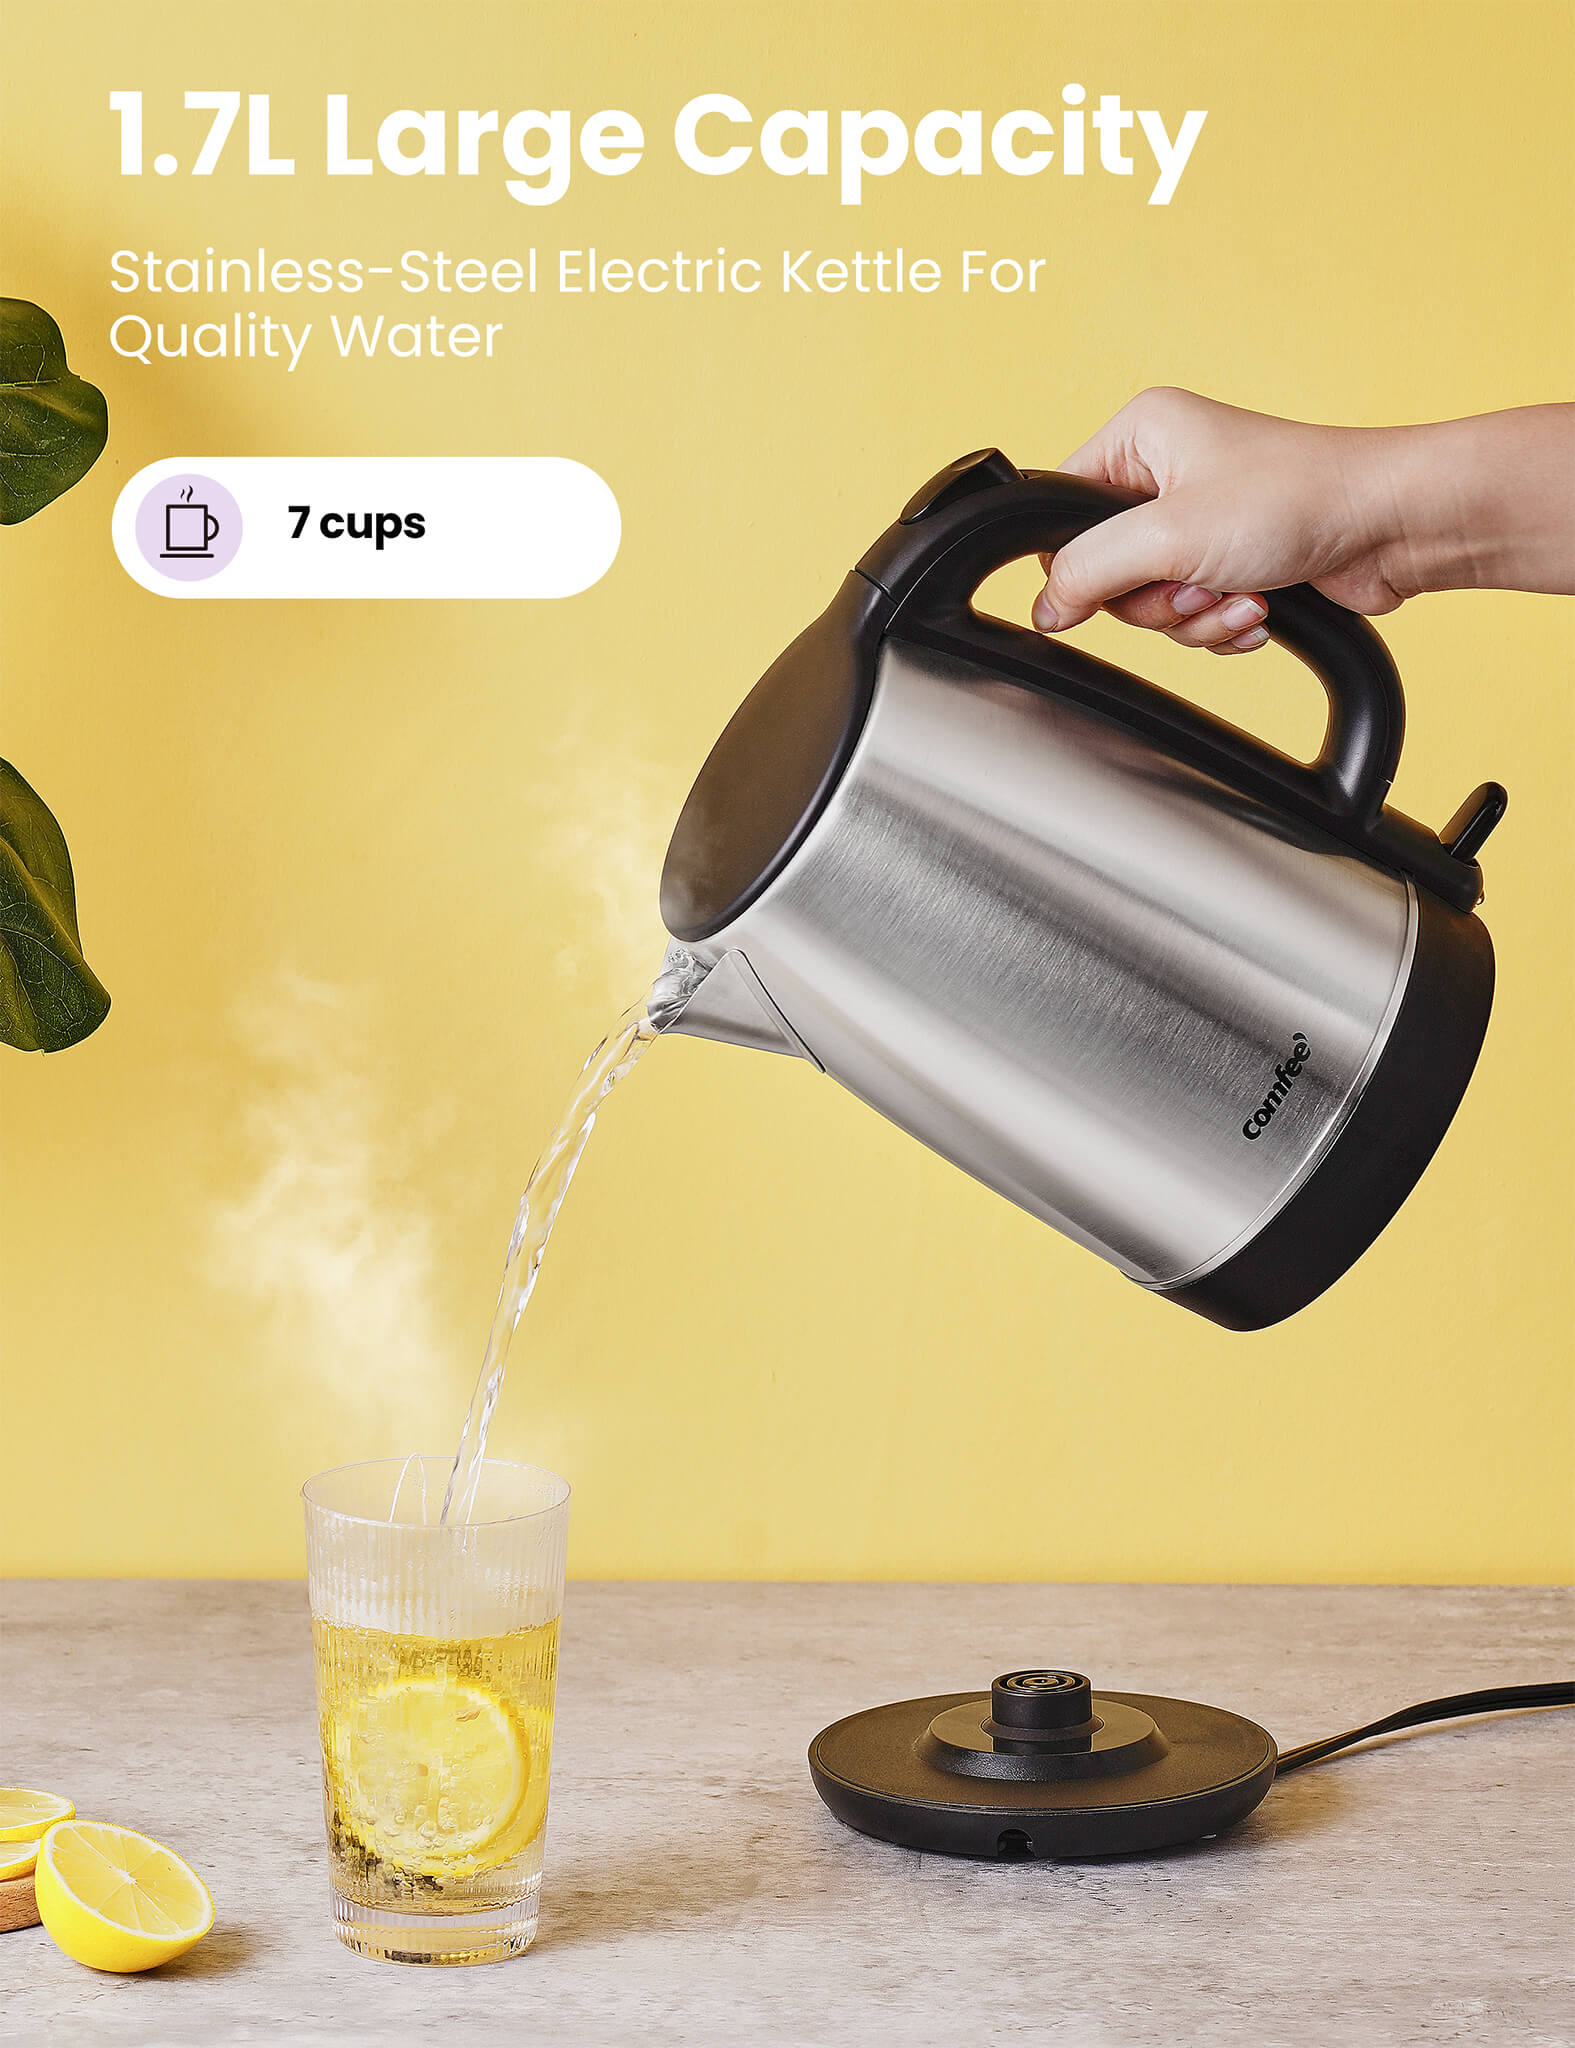 stainless steel electric tea kettle with 1.7L capacity